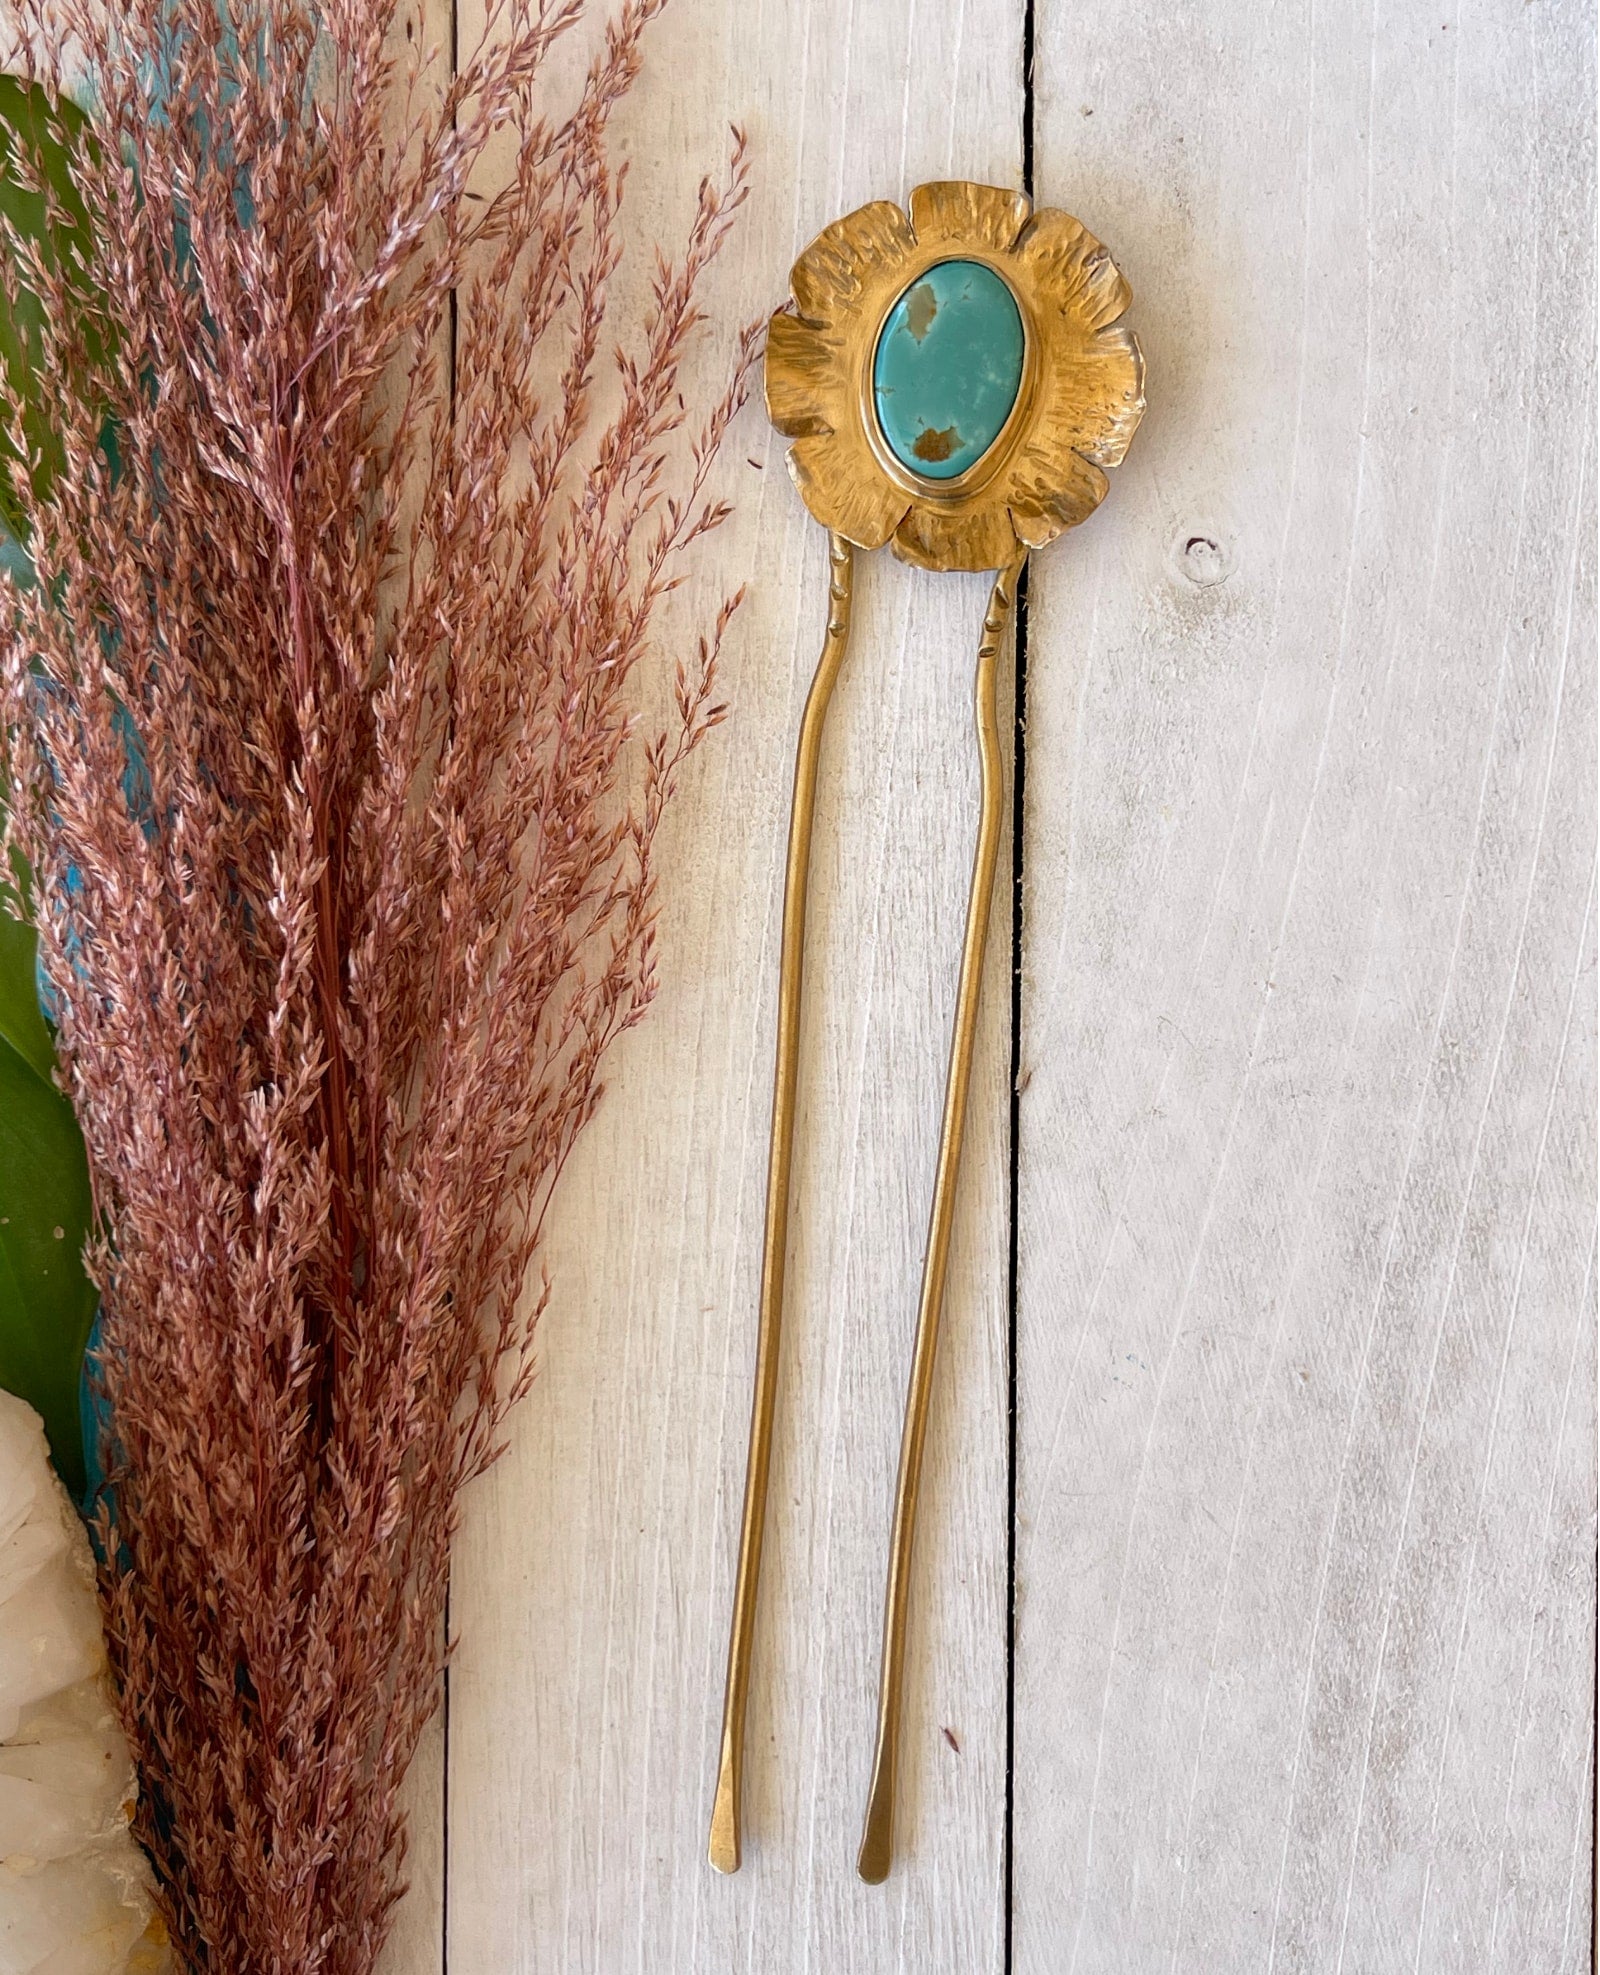 Turquoise Flower Hair Pin - With Brass Pin.